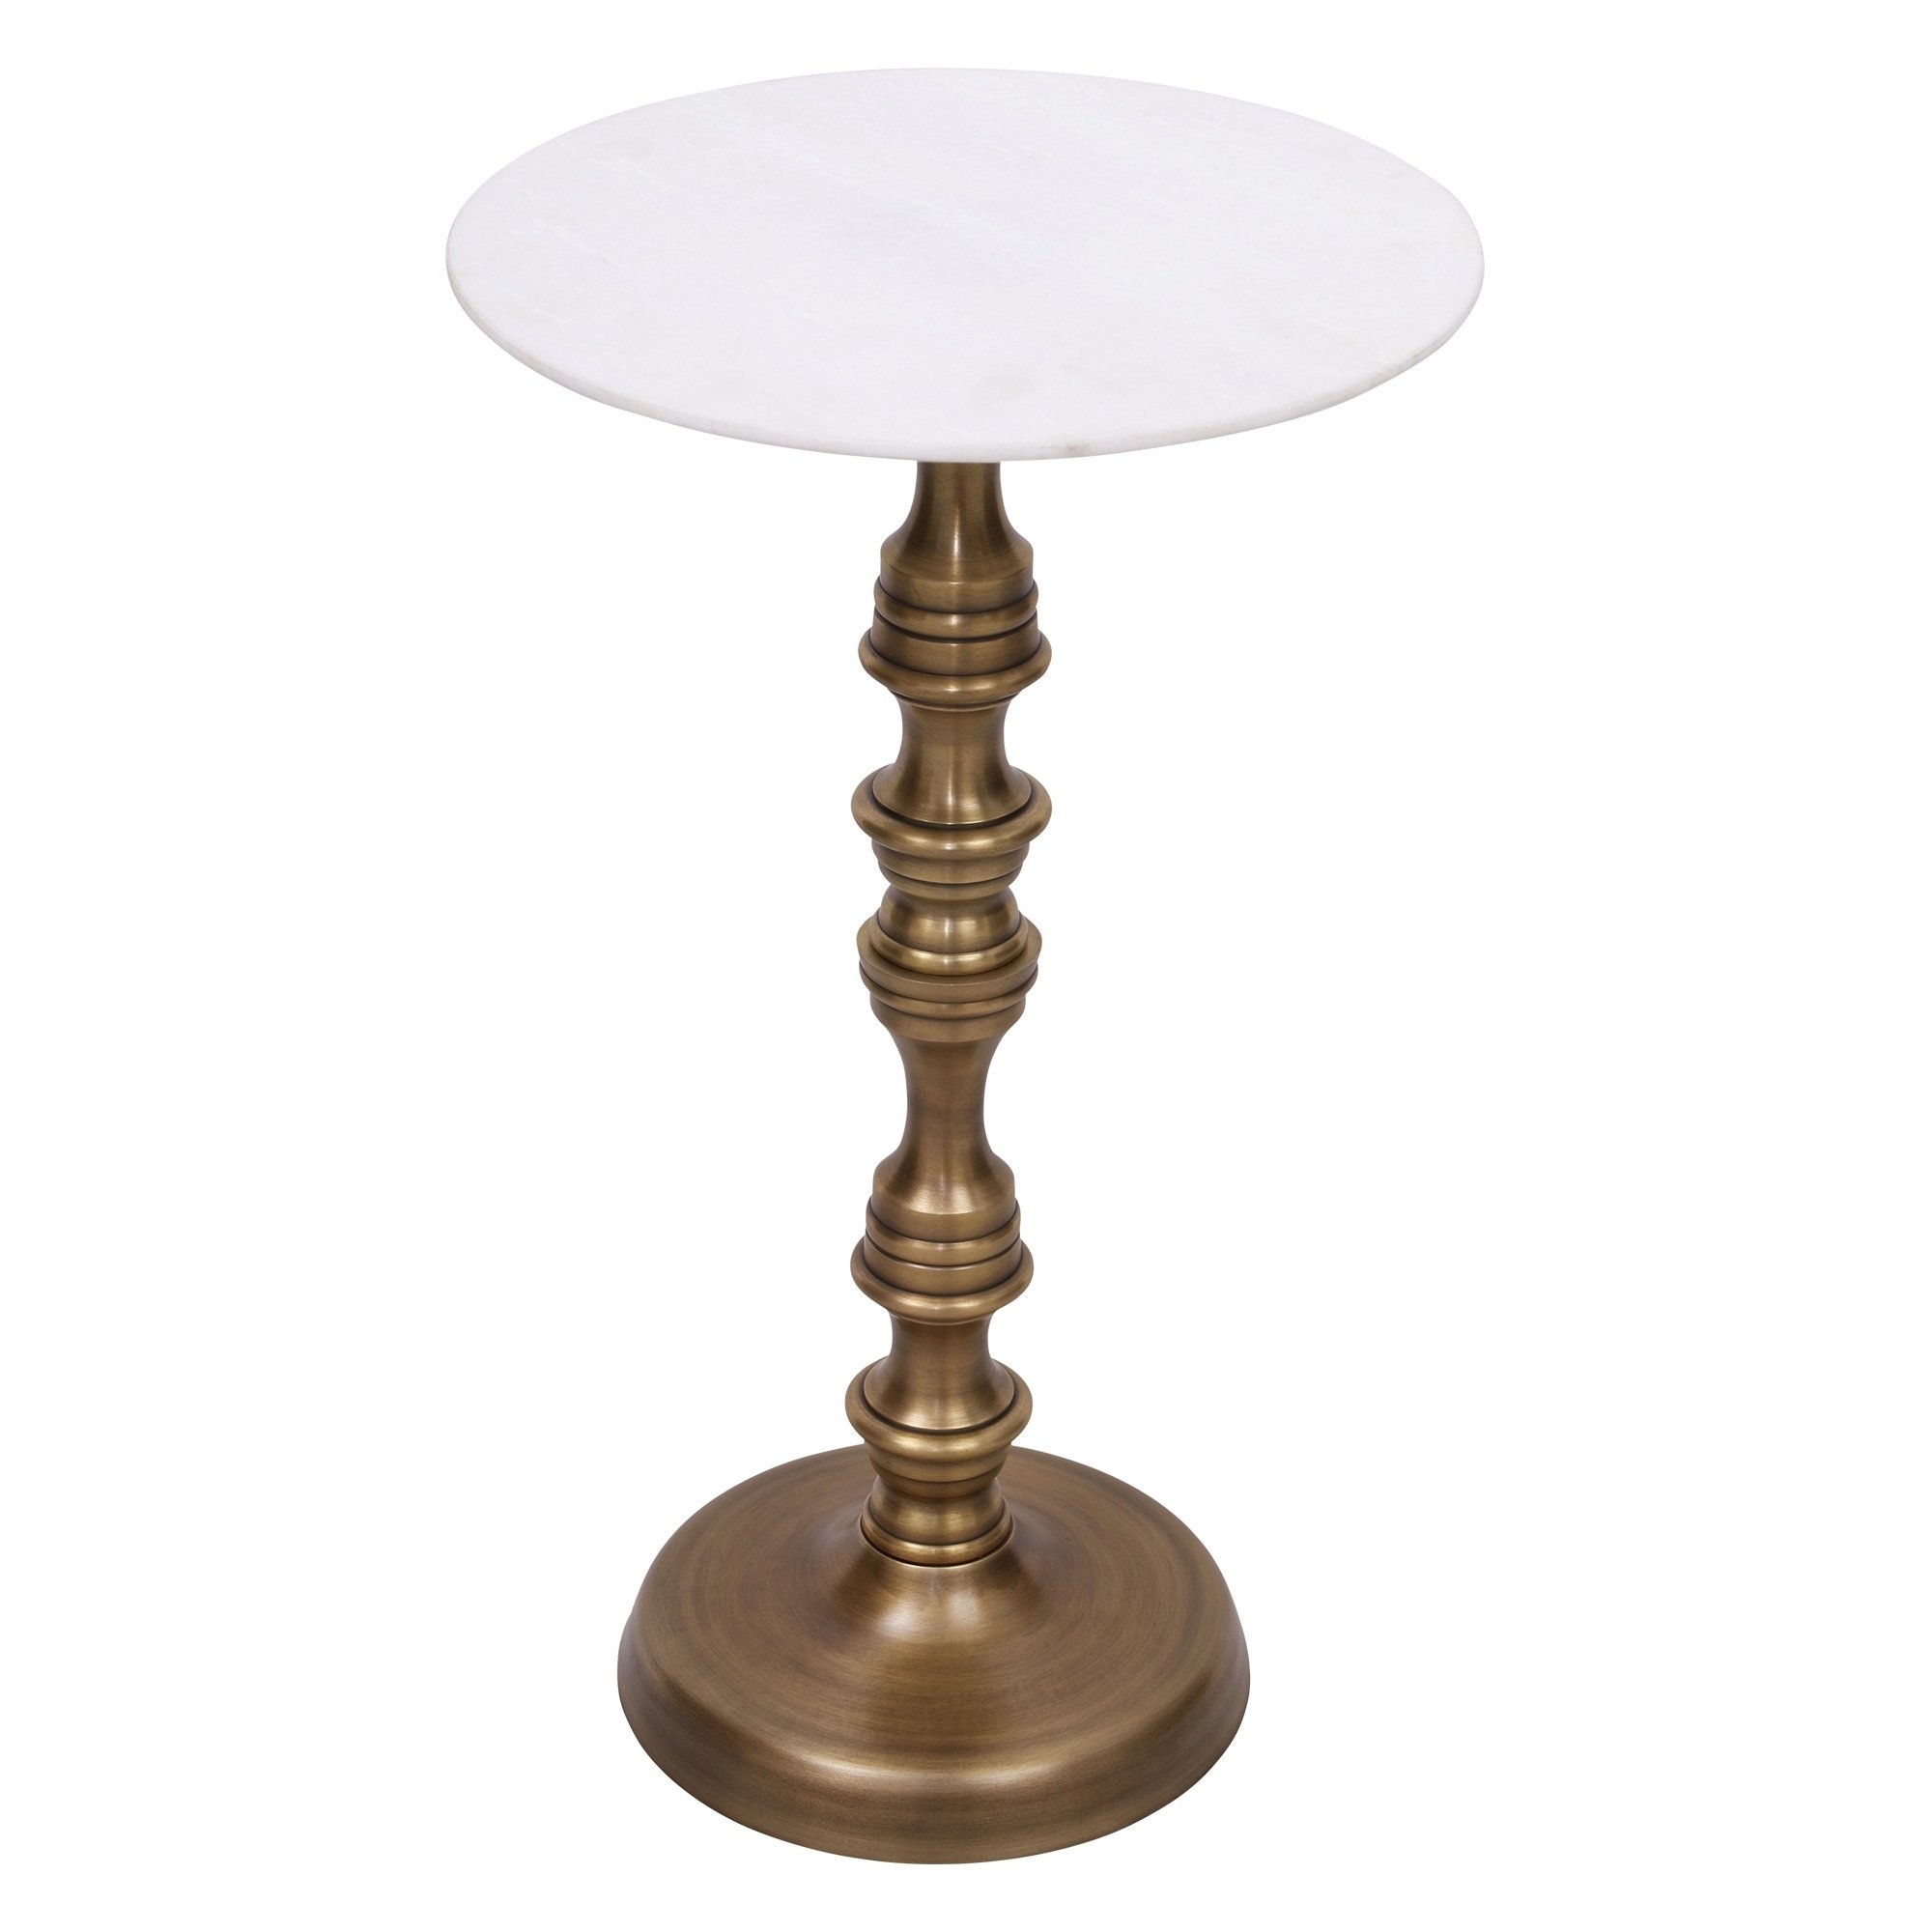 renwil jasper marble bronze round accent table free shipping today gold coffee folding drinks modern writing desk ethan allen pineapple solid wood end with drawer inch square